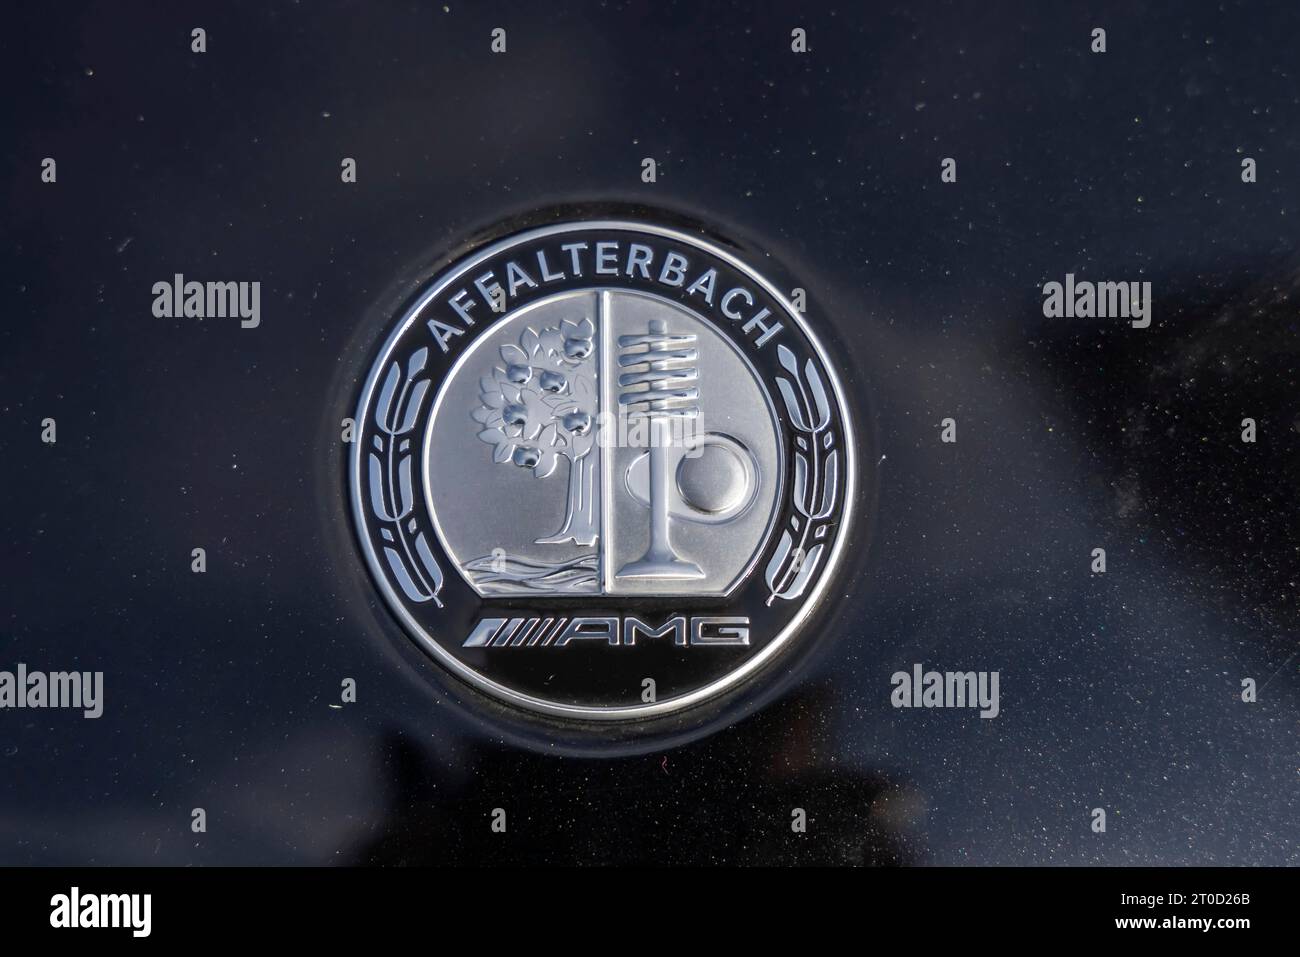 Vehicle of the Mercedes AMG brand. Badge on bonnet with AMG logo and Affalterbach lettering, Stuttgart, Baden-Wuerttemberg, Germany Stock Photo